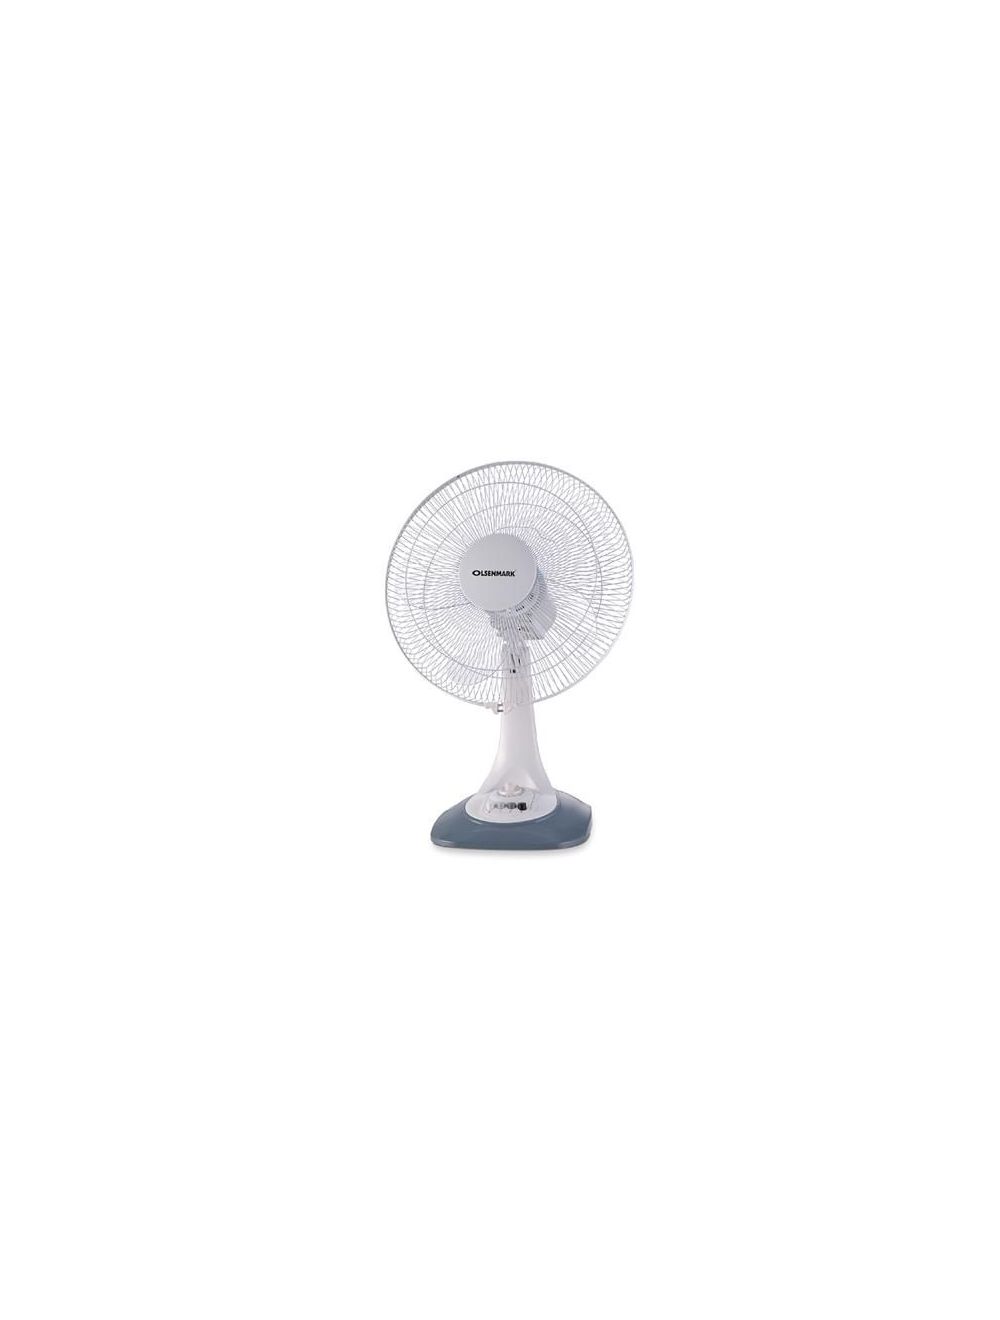 Olsenmark Table Fan, 16 Inch - Piano Switches - 3 Speed Setting - 120 Ribbed Grills, 5 Leaf ABS Transparent Blades